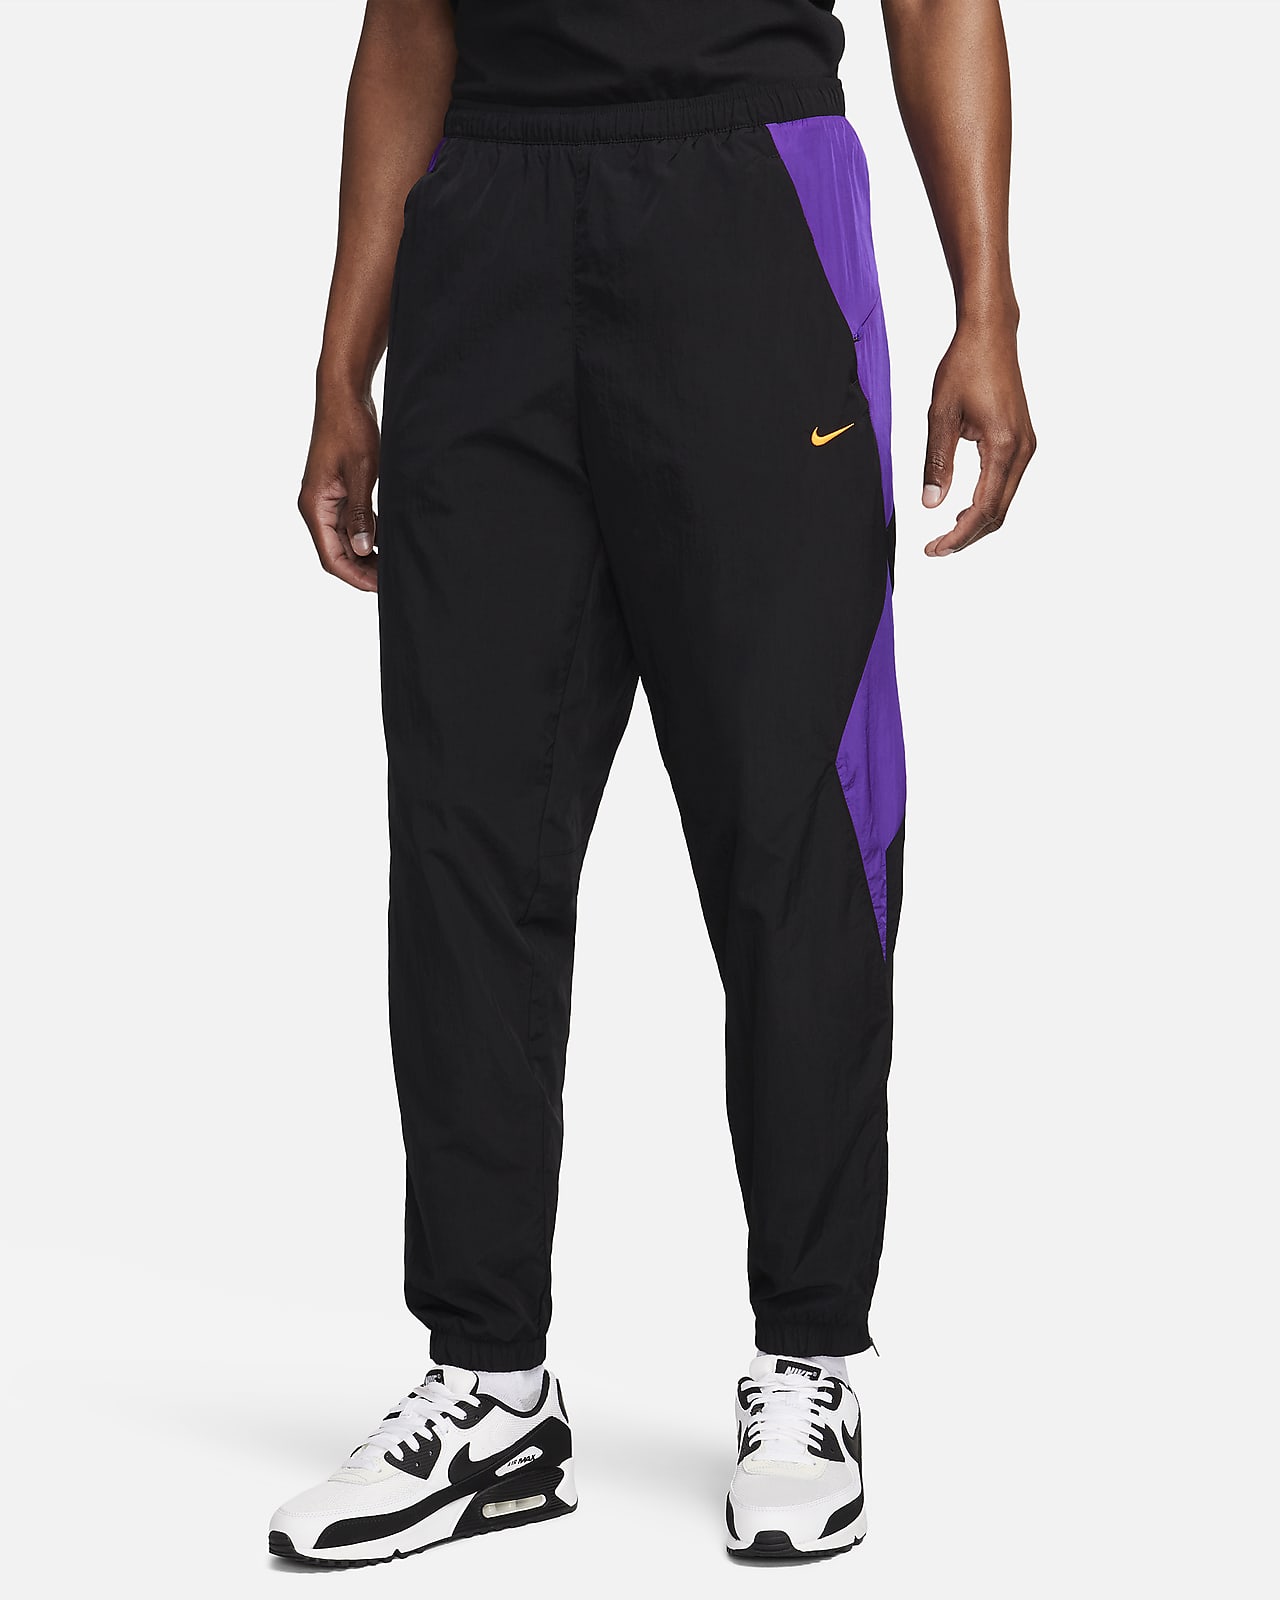 Purple Nike Performance Yoga Clothes Size XXL, Yoga Clothing, Free  Delivery*